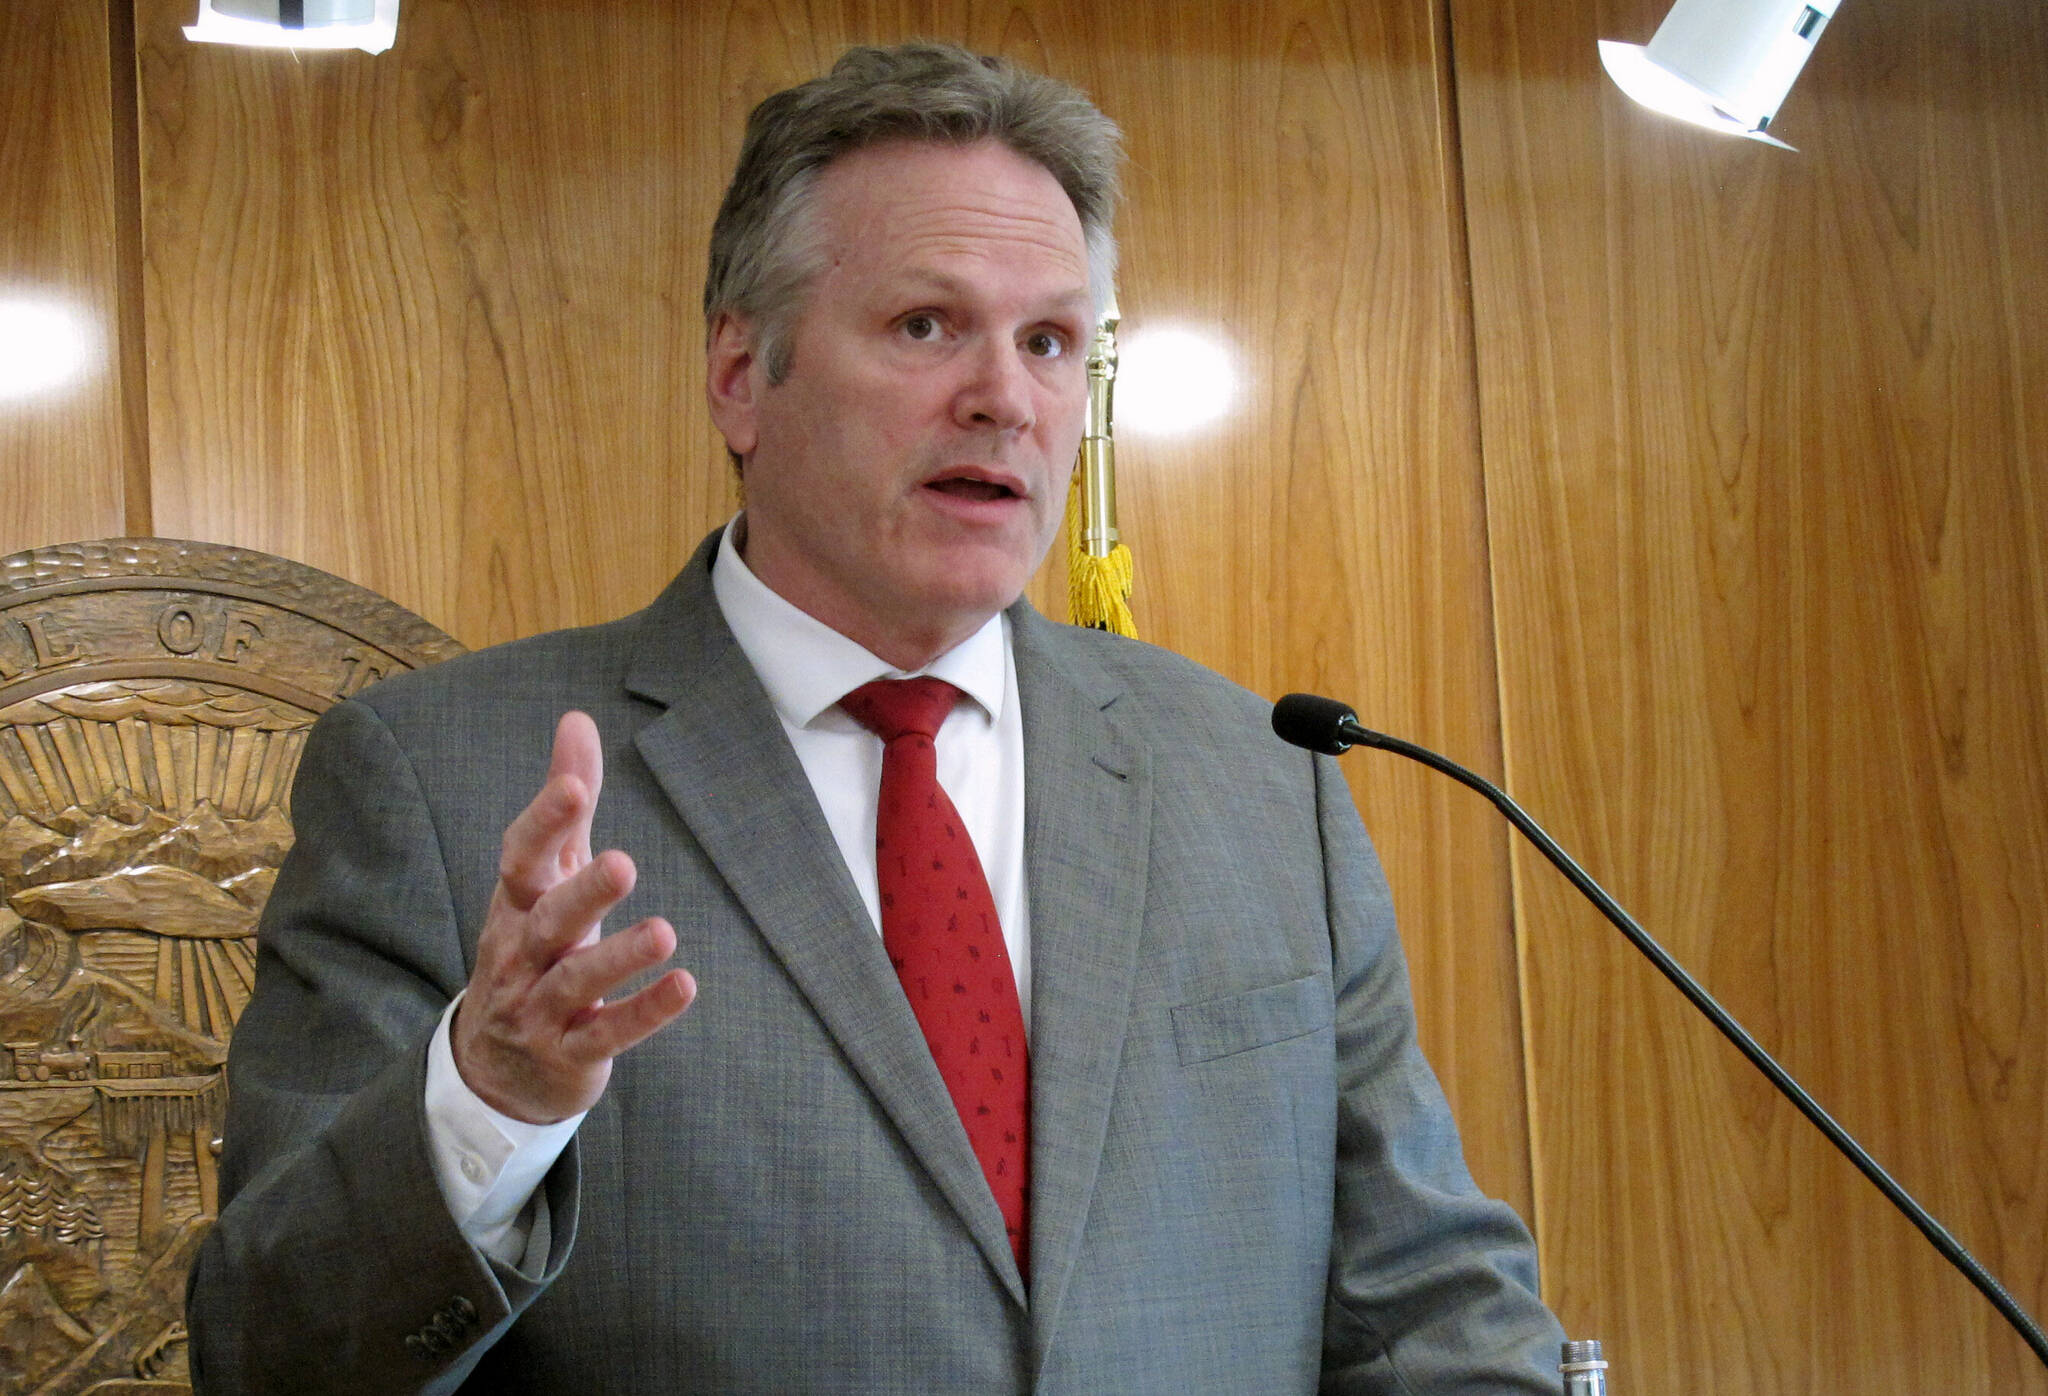 Gov. Mike Dunleavy speaks to reporters during a news conference at the state Capitol on April 28, 2022, in Juneau, Alaska. Nearly every single Alaskan got a financial windfall amounting to more than $3,000 on Tuesday, Sept. 20, 2022, the day the state began distributing payments from Alaska’s investment fund that has been seeded with money from the state’s oil riches. (AP Photo/Becky Bohrer, File)